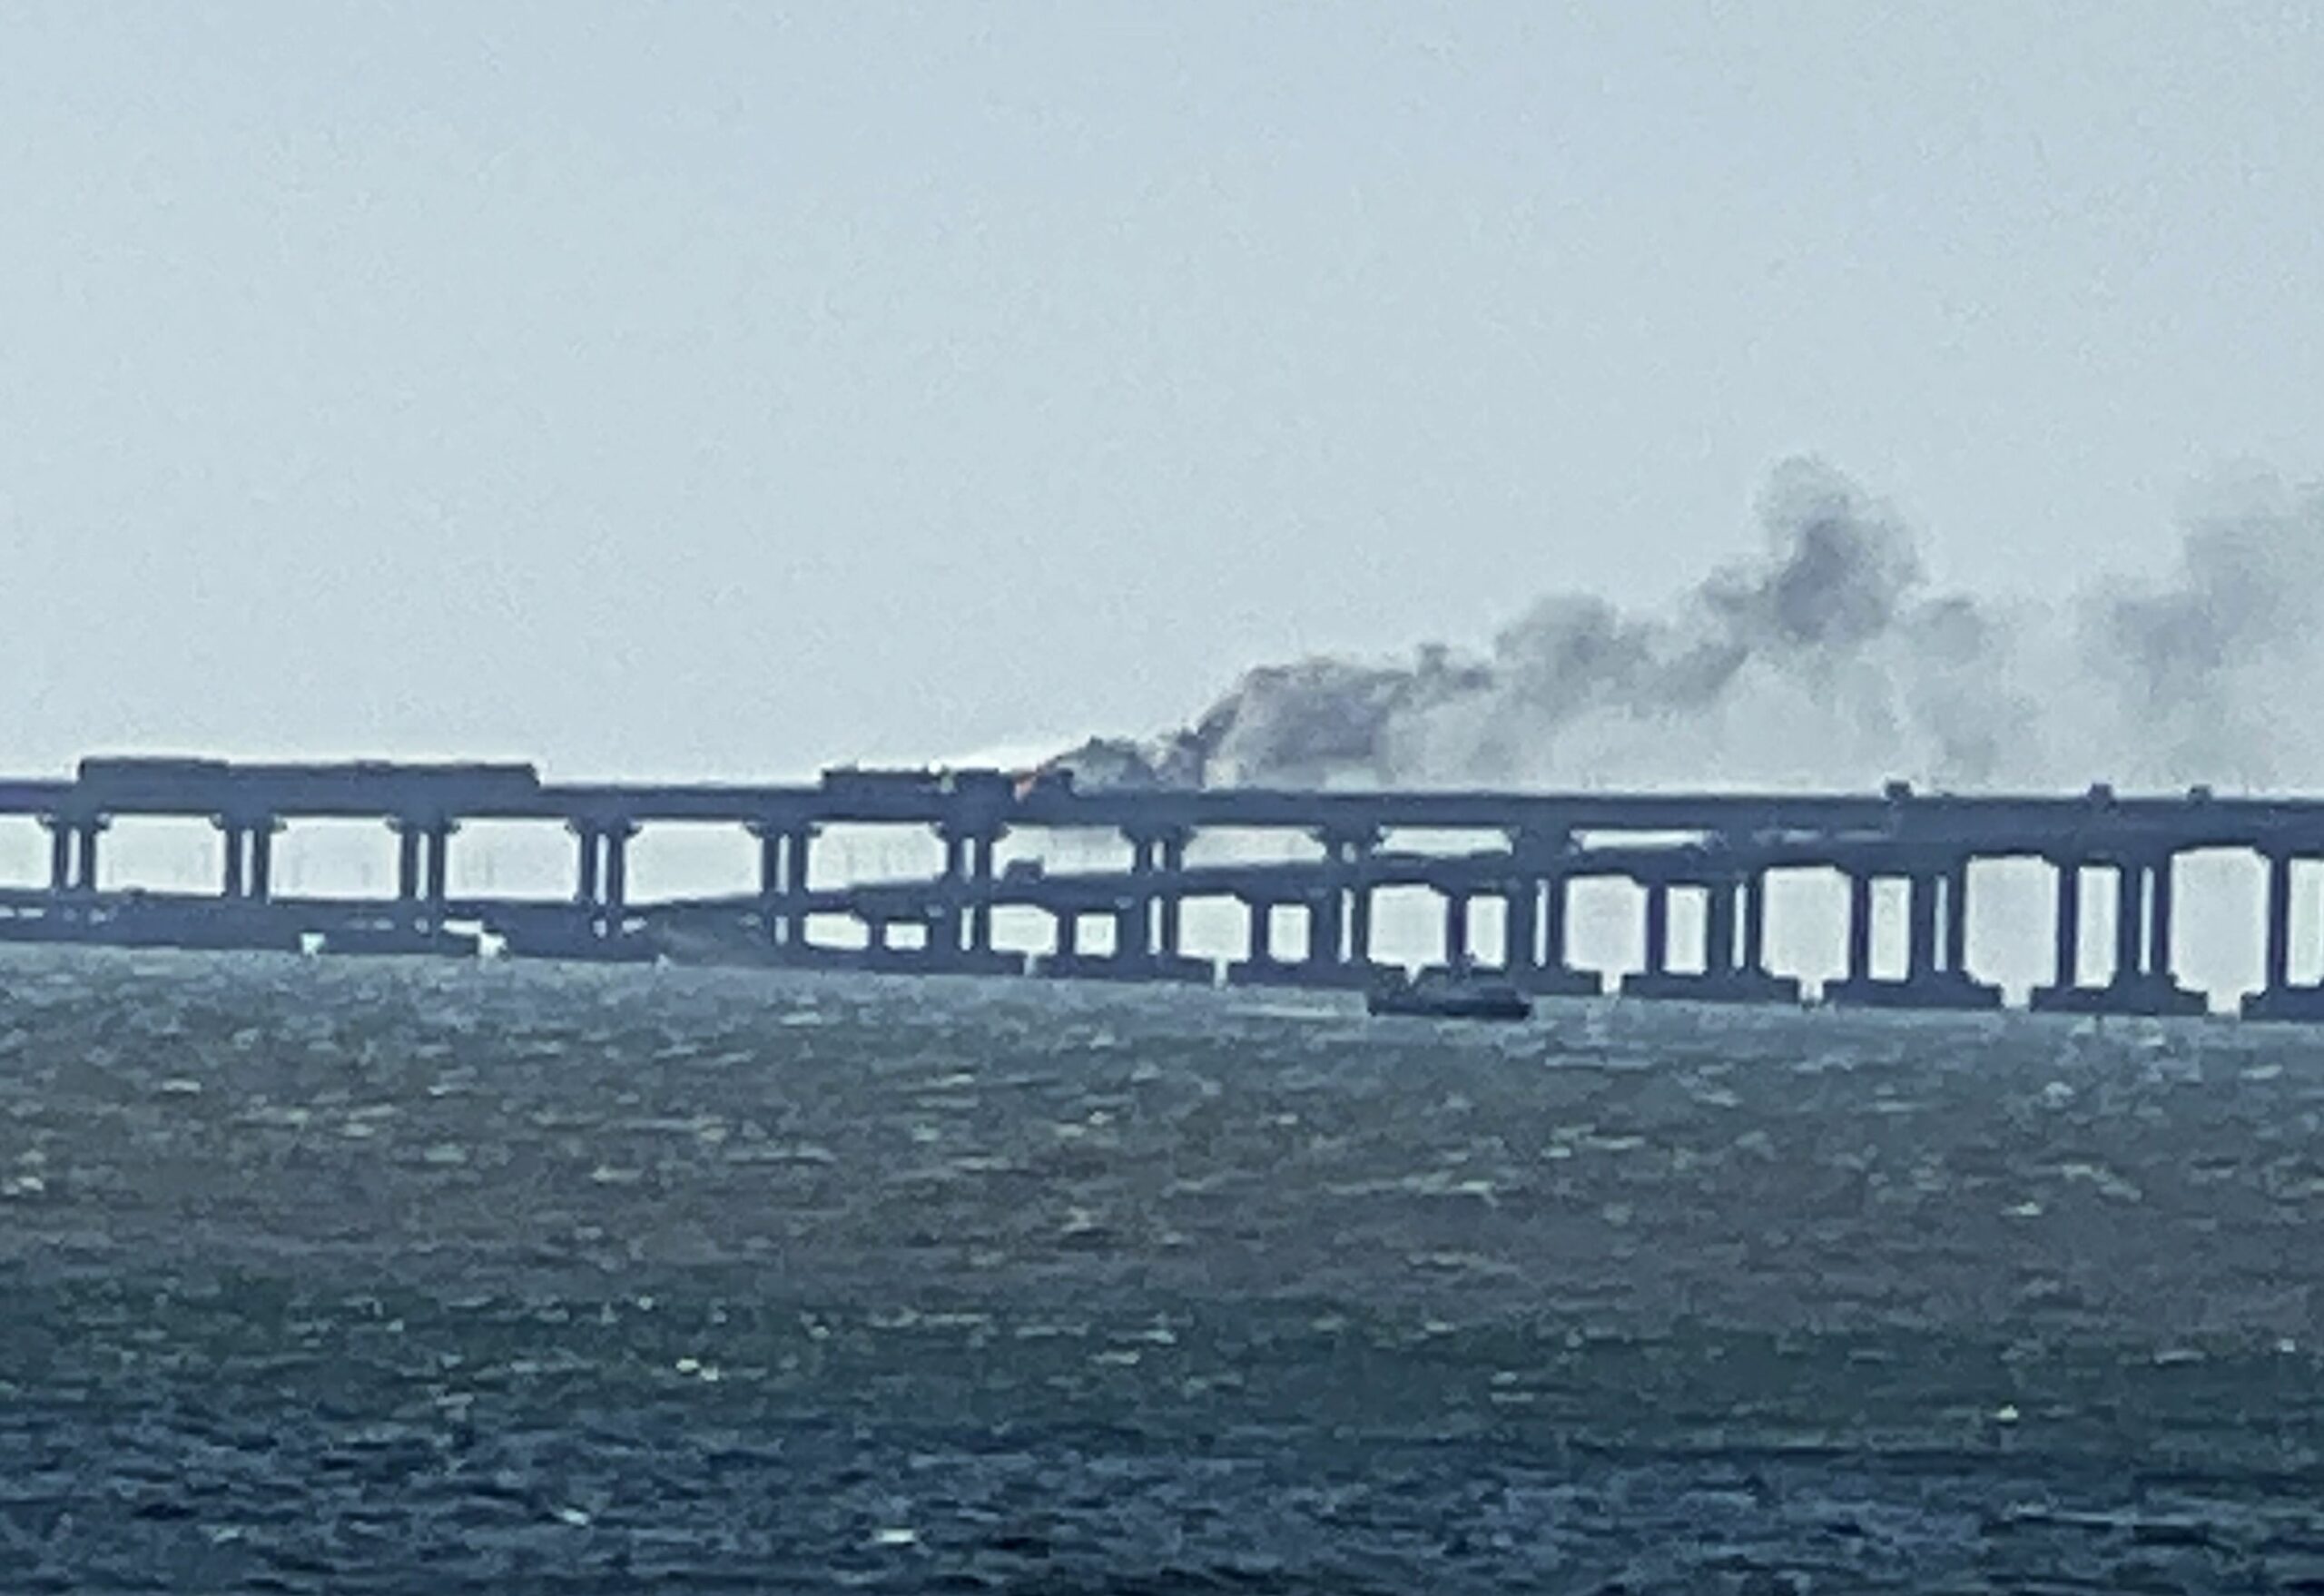 8291779 08.10.2022 A view shows a smoke rising from a fire on Crimean Bridge connecting Russian mainland and Crimean peninsula over the Kerch Strait, in Crimea, Russia. Russia's National Antiterrorism Committee (NAC) said on Saturday that a truck was blown up on the Crimean Bridge, which caused an inflammation of seven fuel tanks of a railway train and a partial collapse of two car spans. The traffic and movement of trains across the Kerch Strait was temporarily suspended. The movement of ships in the Kerch Strait did not stop despite a fire on the bridge. Elena Ivanova / Sputnik